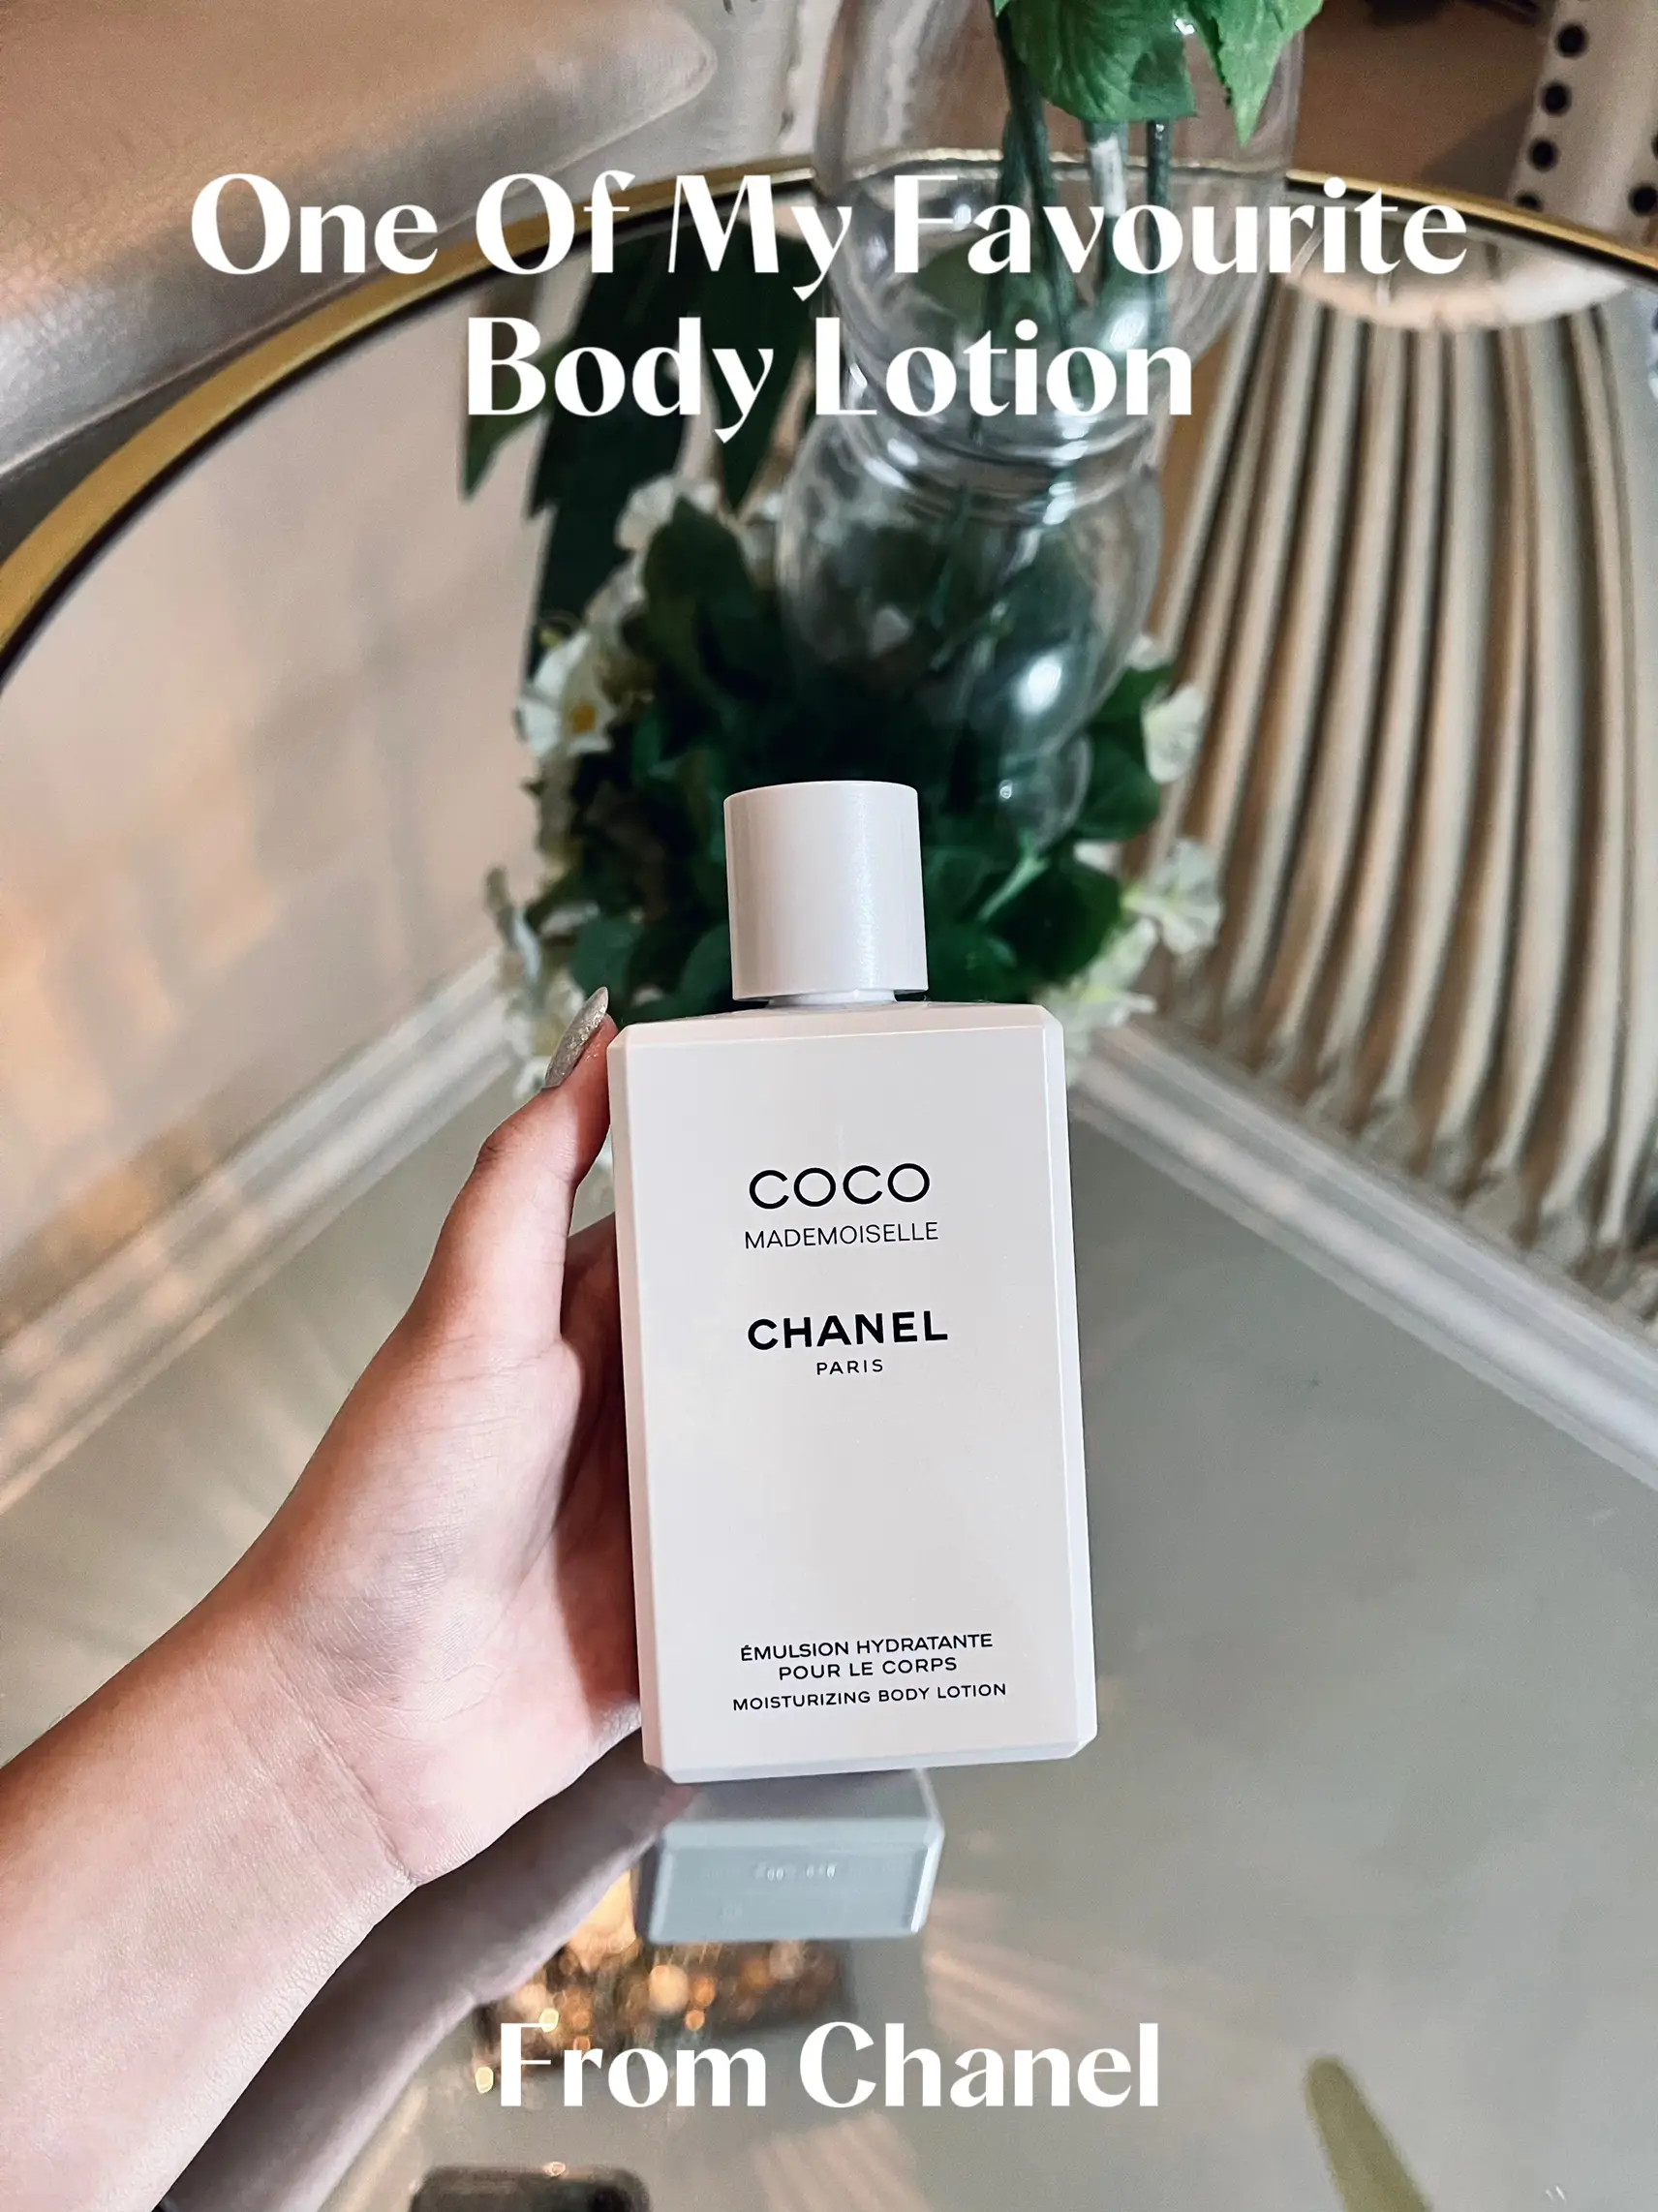 One Of My Favourite Body Lotion from chanel🧴!